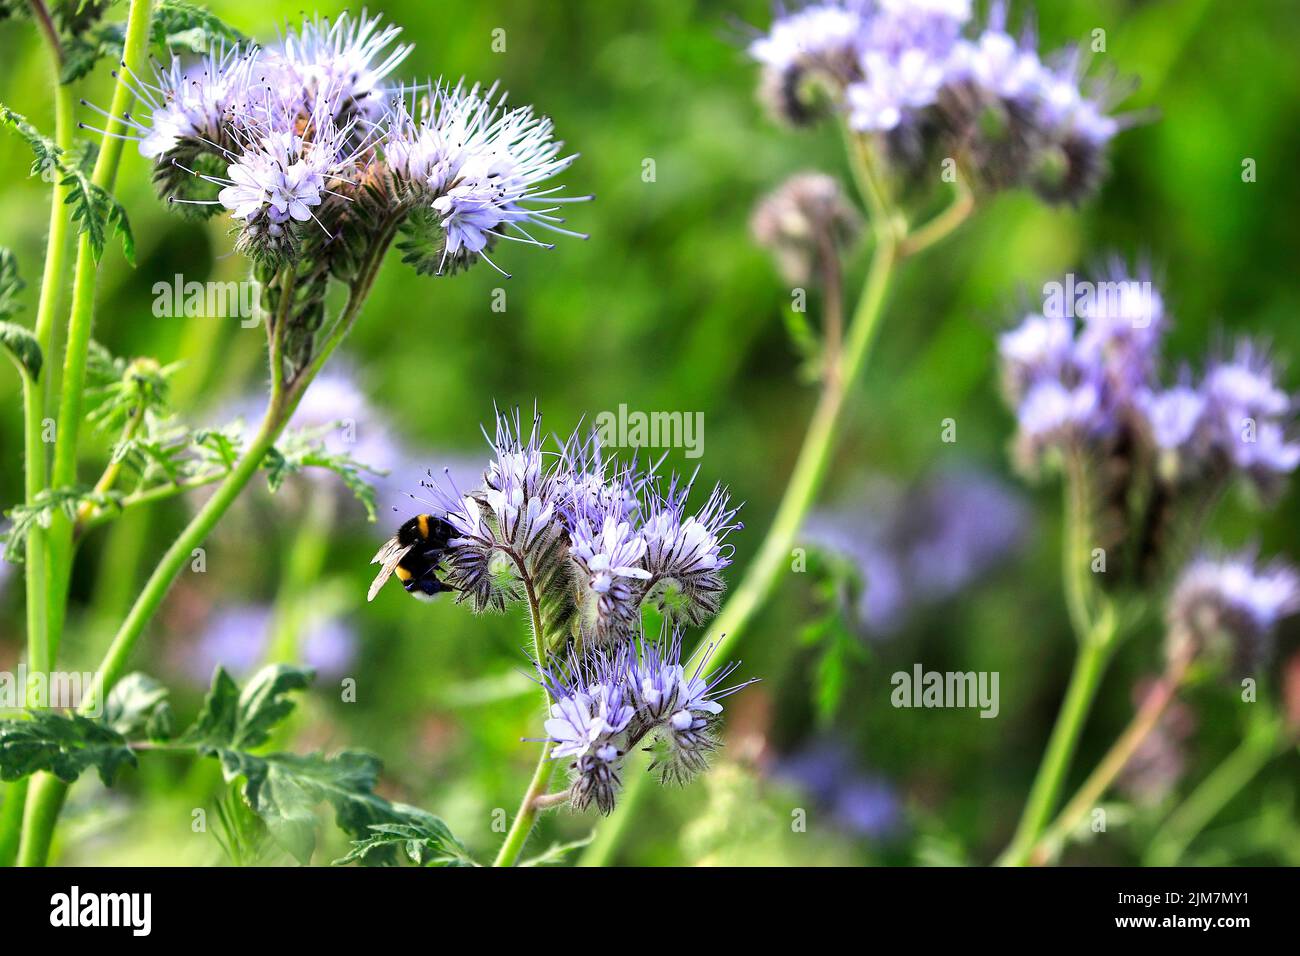 Flowering Lacy phacelia, Phacelia tanacetifolia, often used as a bee plant or cover crop, with a Bumblebee, pollinator insect of Bombus spp. Stock Photo